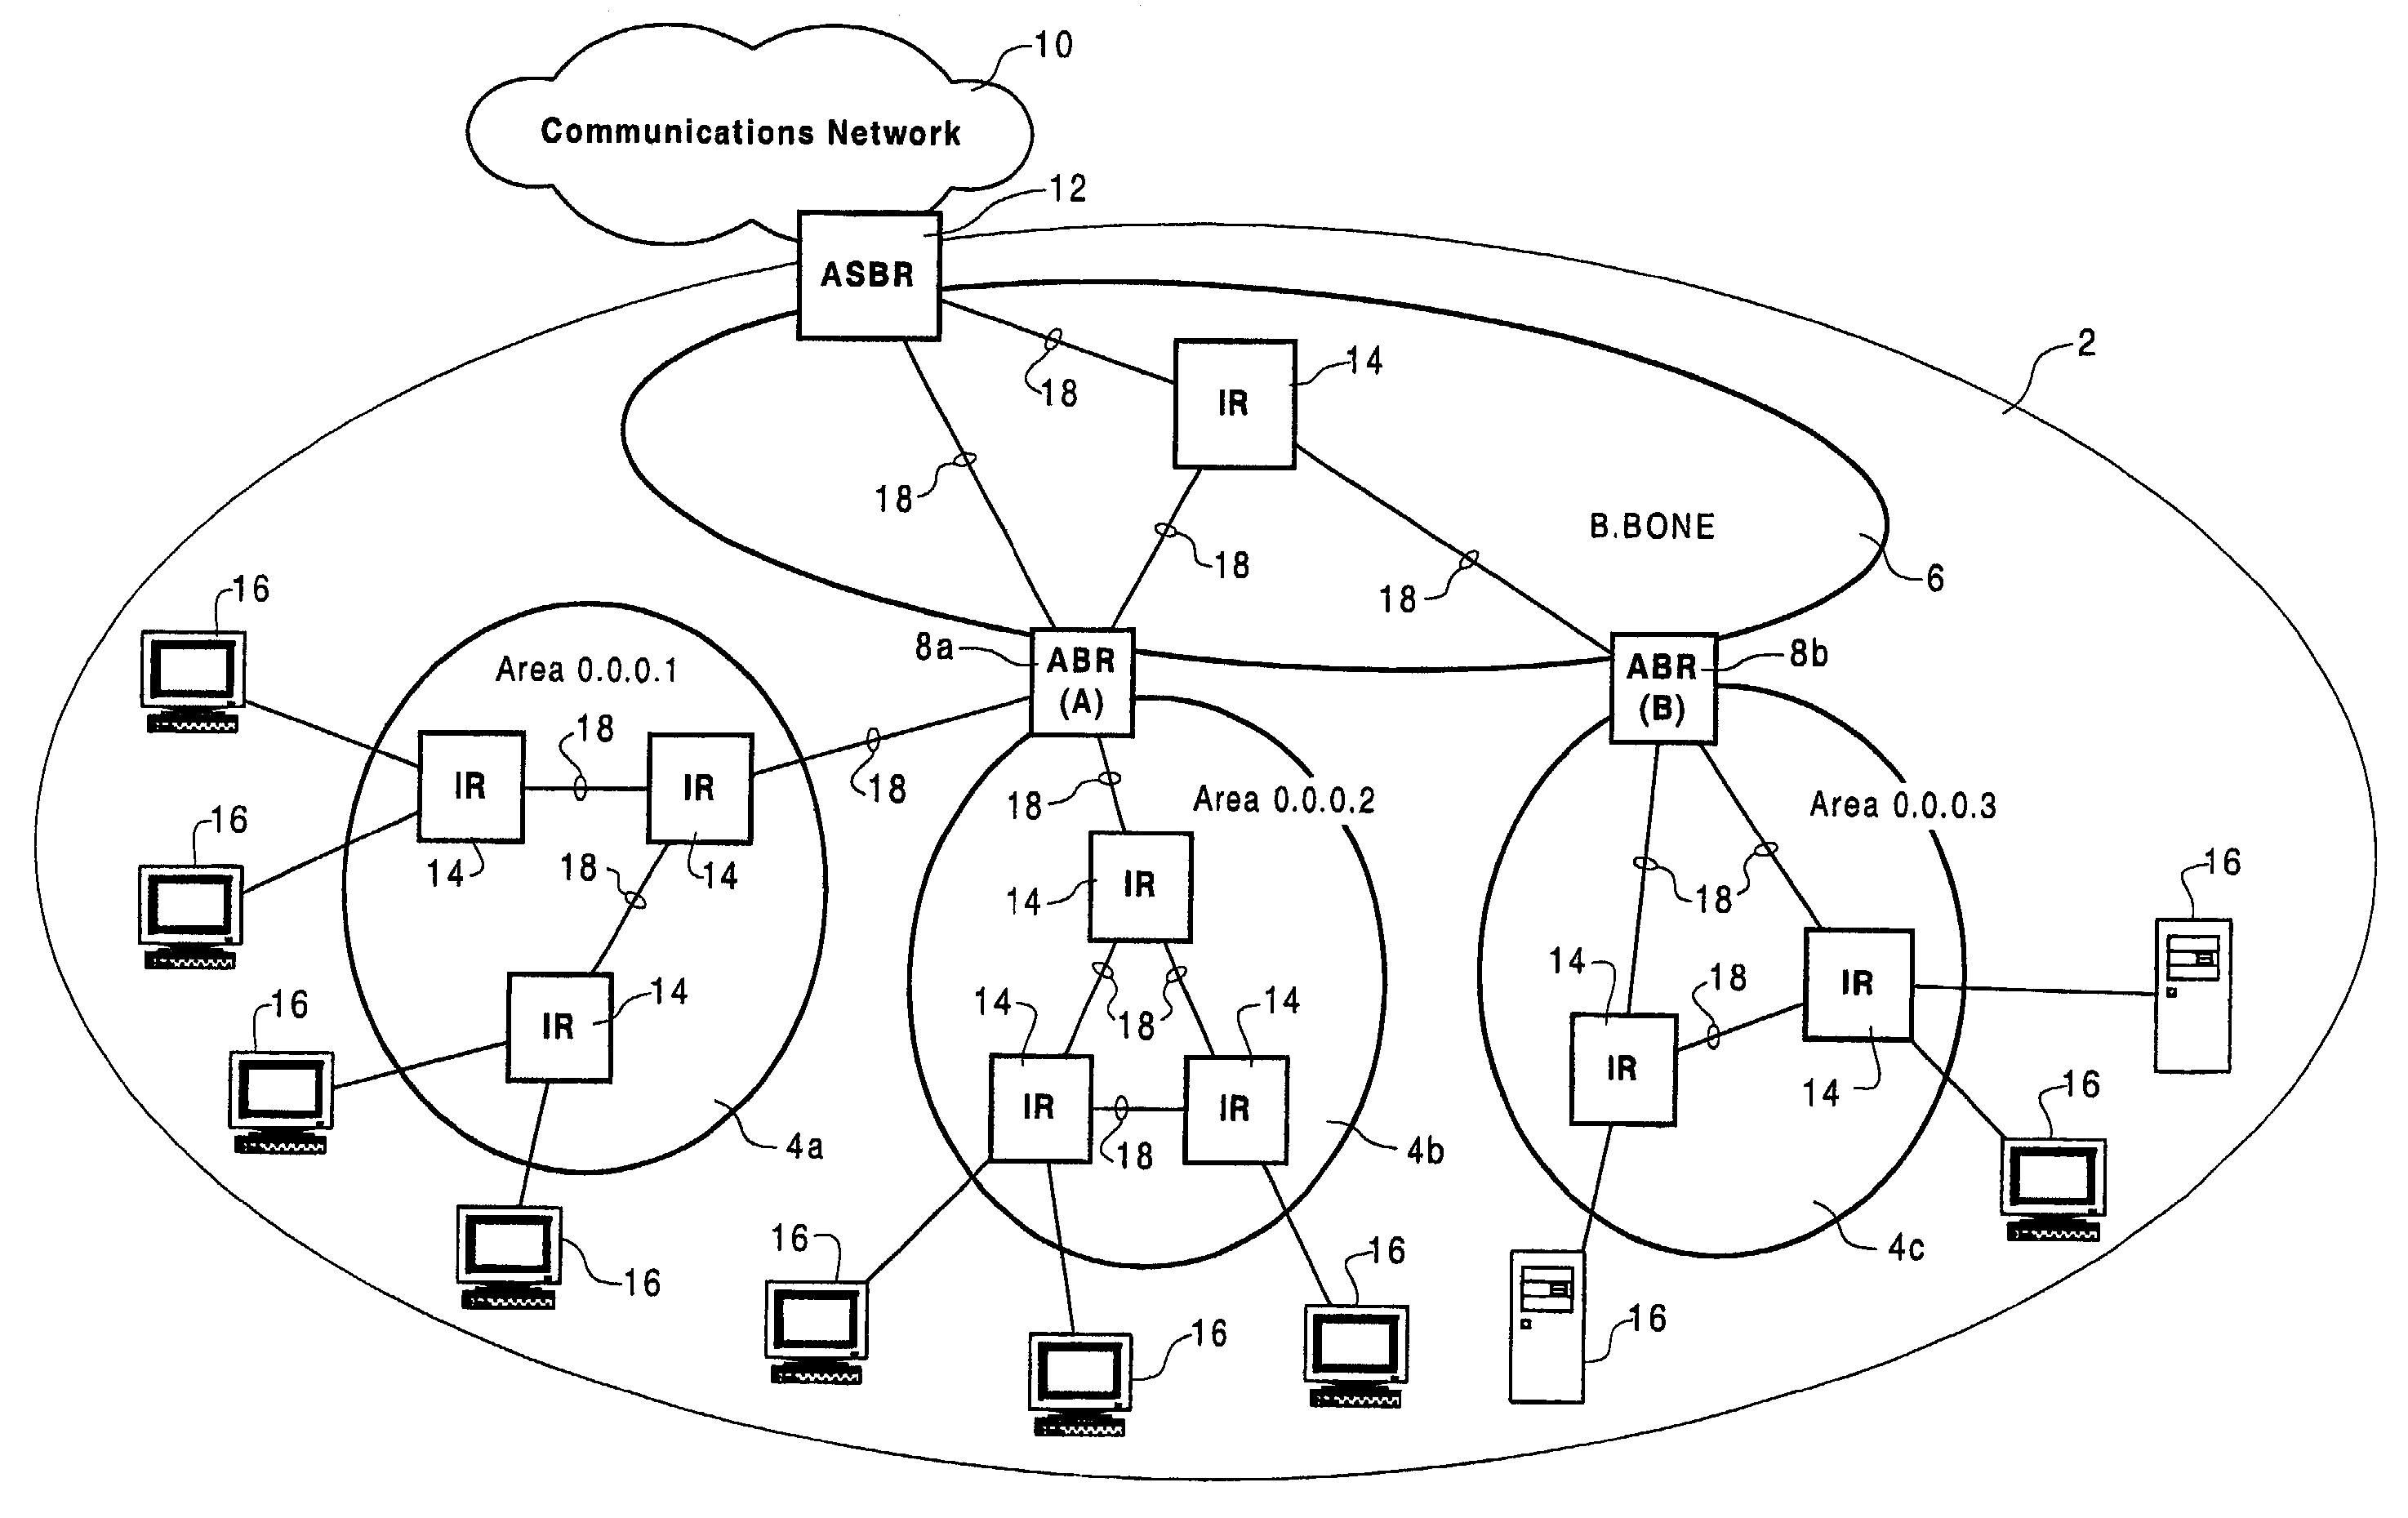 Policy-based forwarding in open shortest path first (OSPF) networks